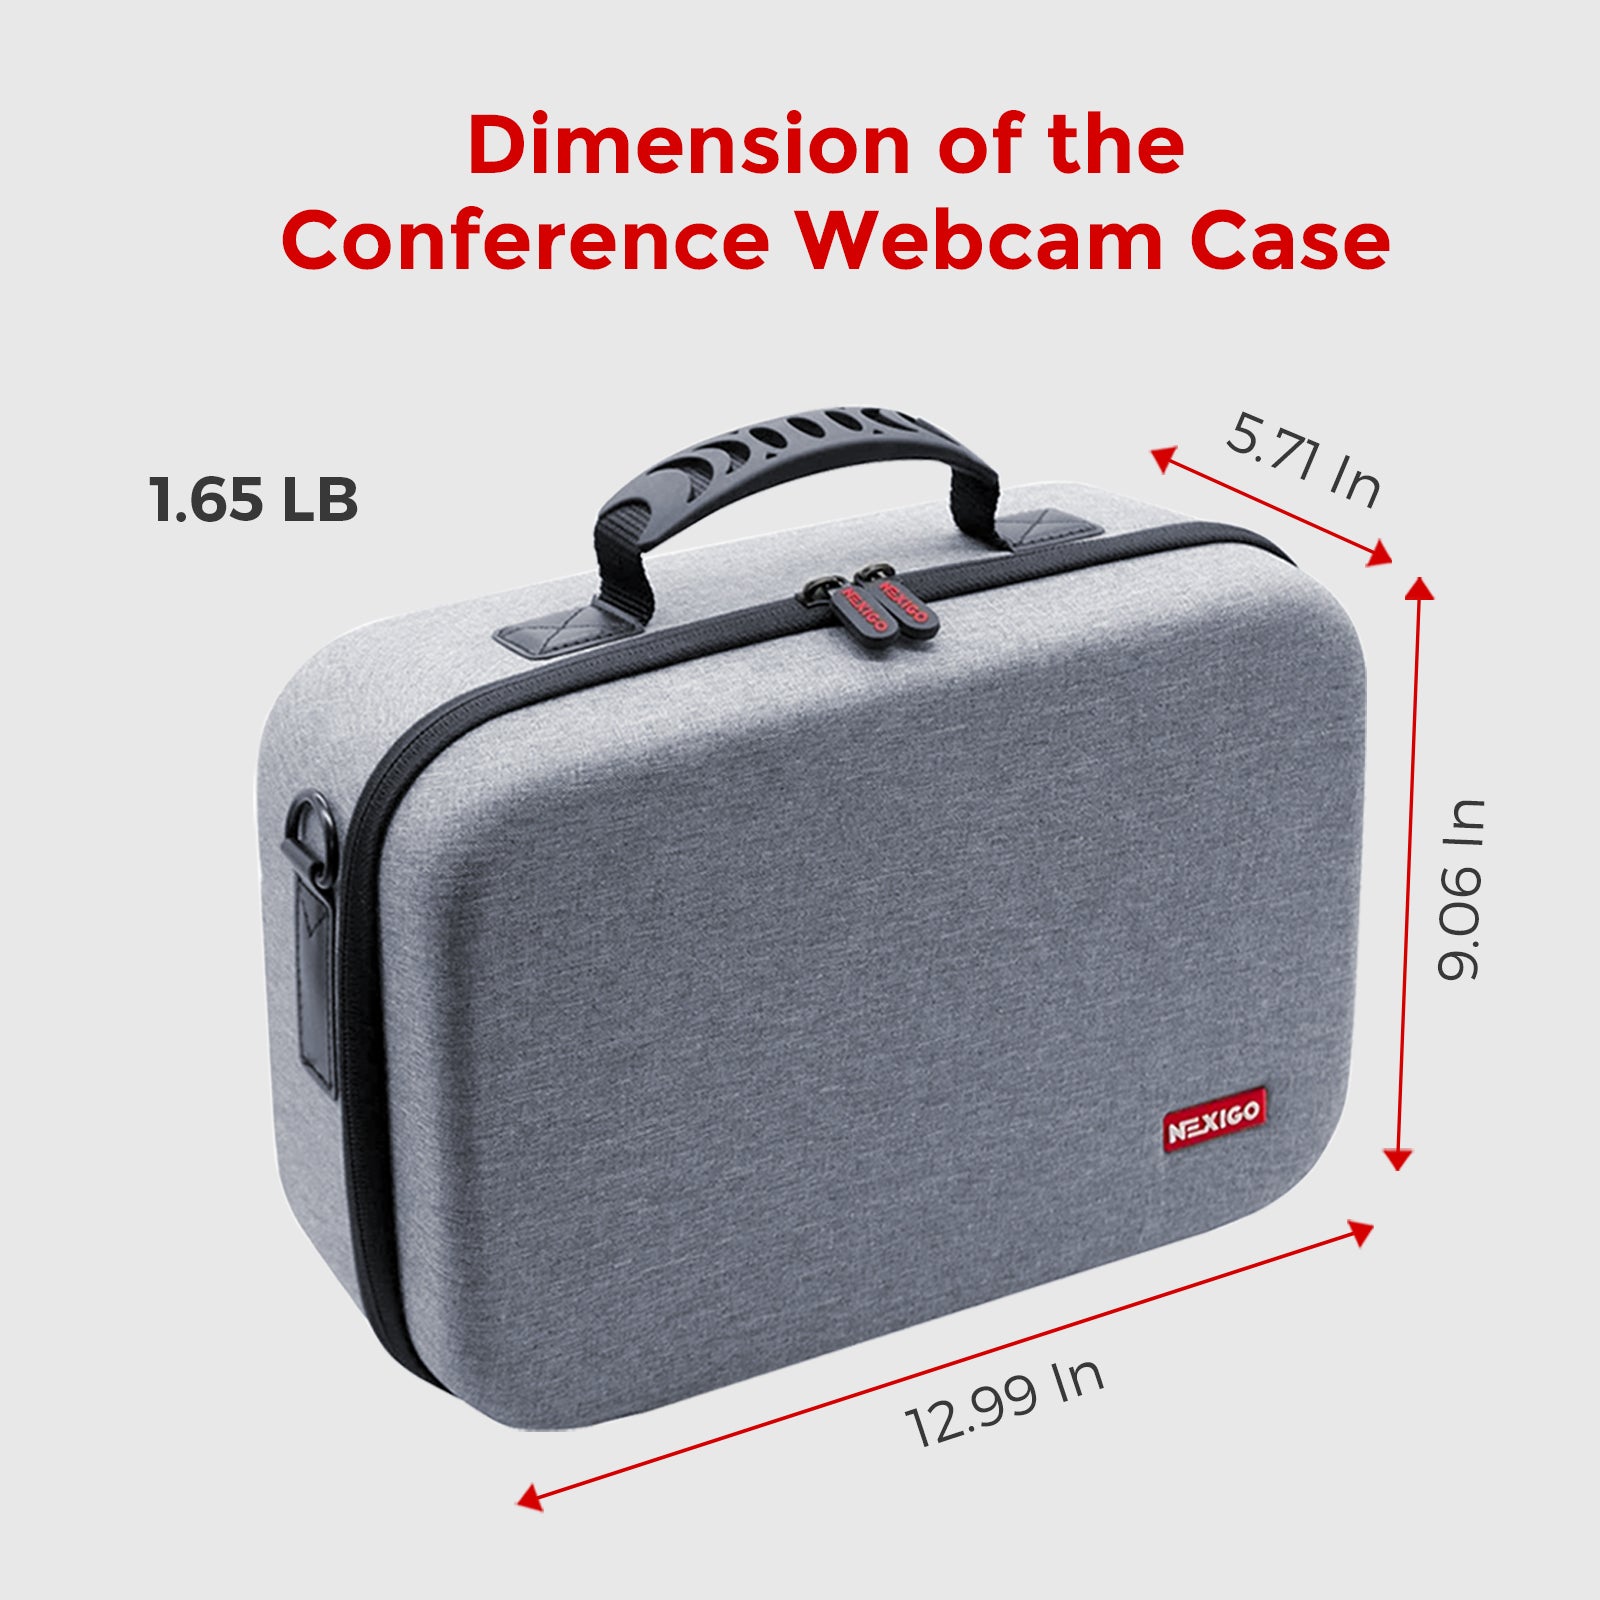 The carrying case weighs 1.65lb, length is 12.99inch, width is 9.06inch, and height is 5.71inch.